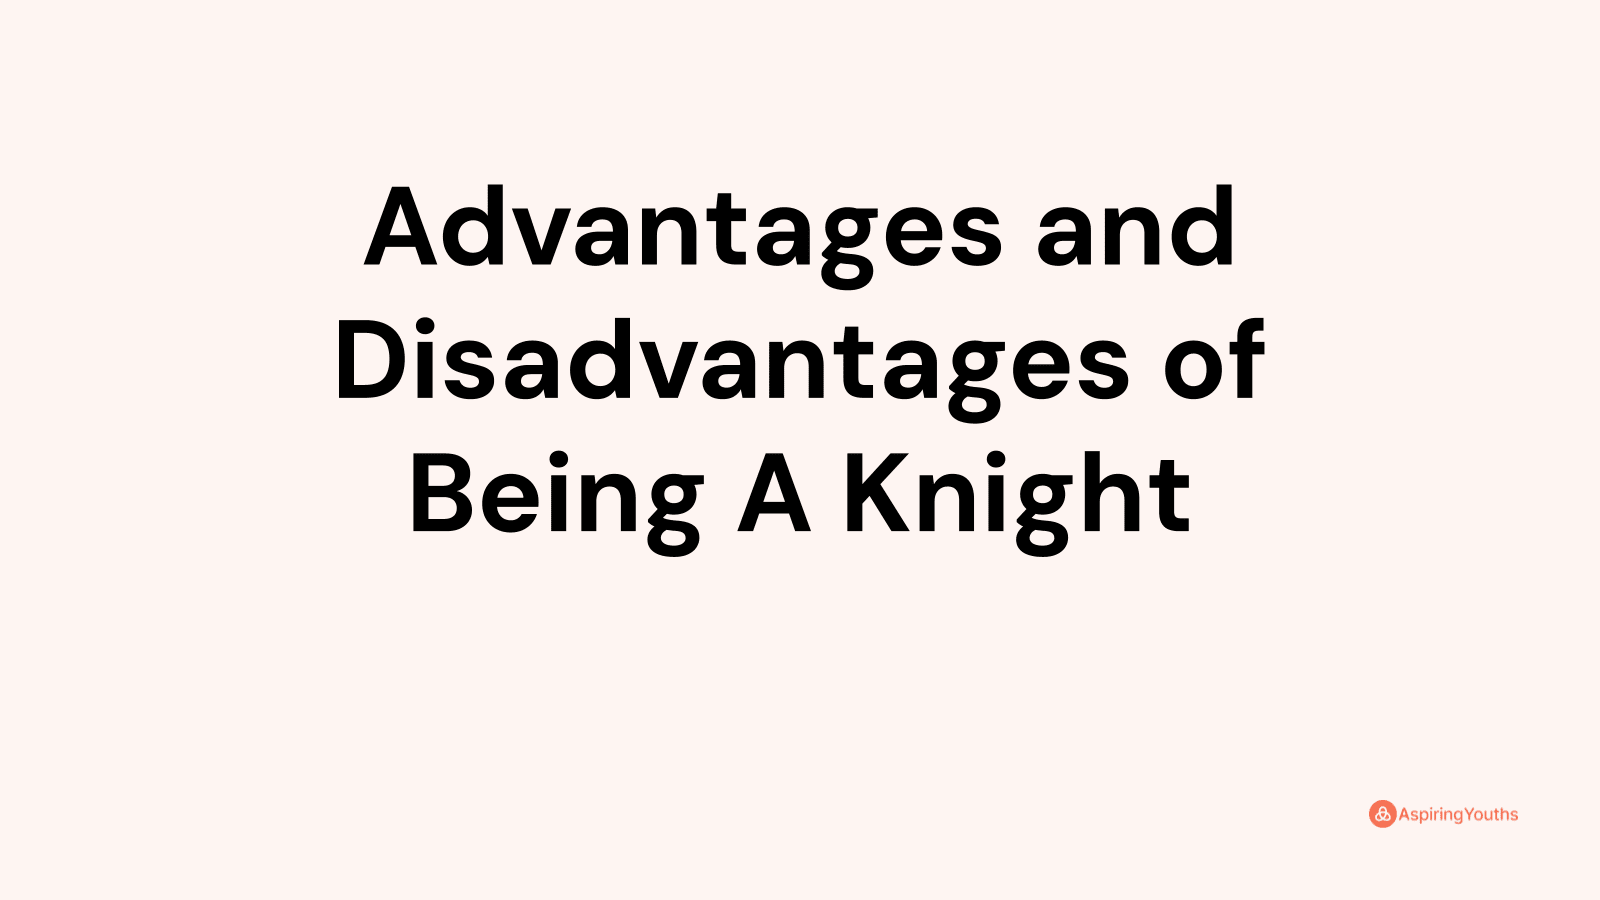 Advantages and disadvantages of Being A Knight